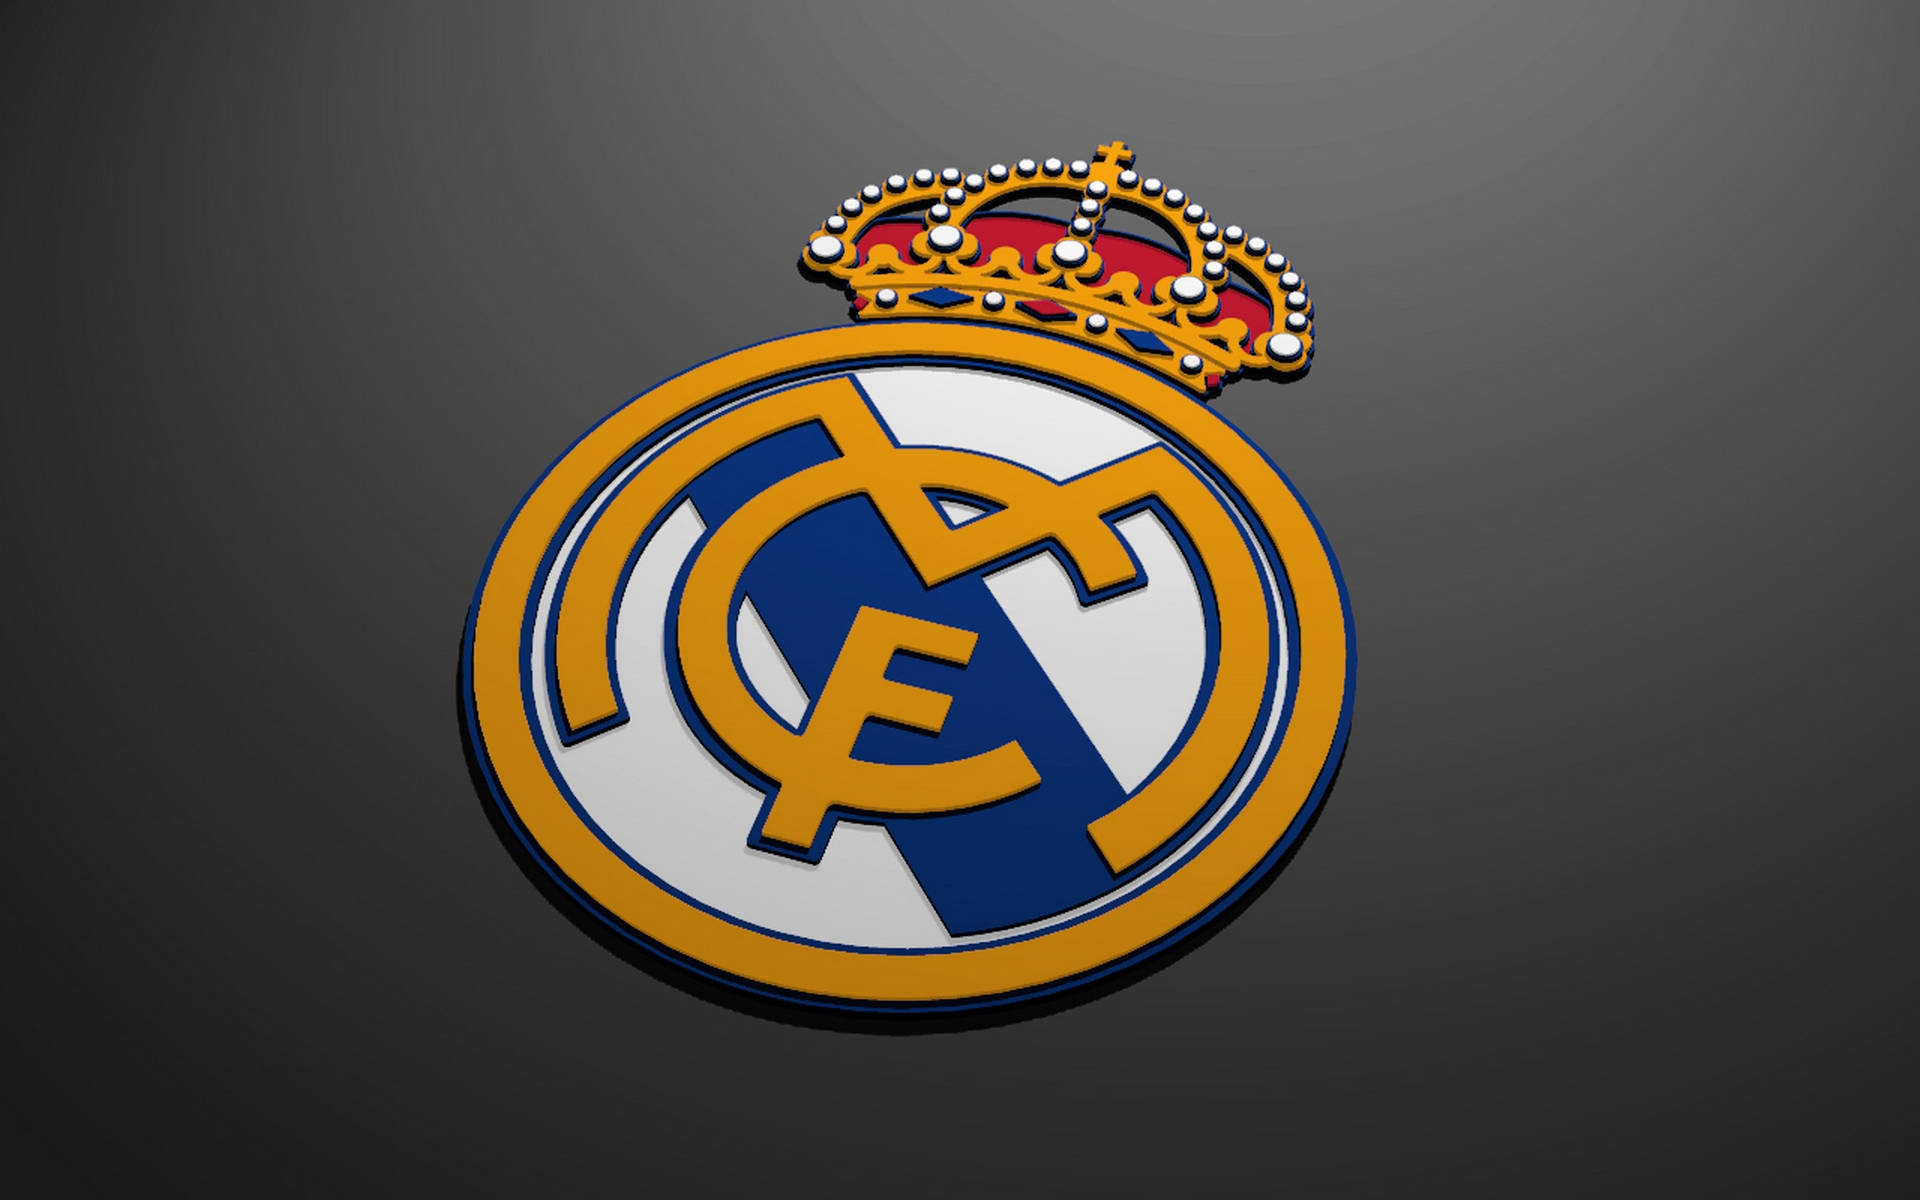 Real Madrid Logo In Gray Background